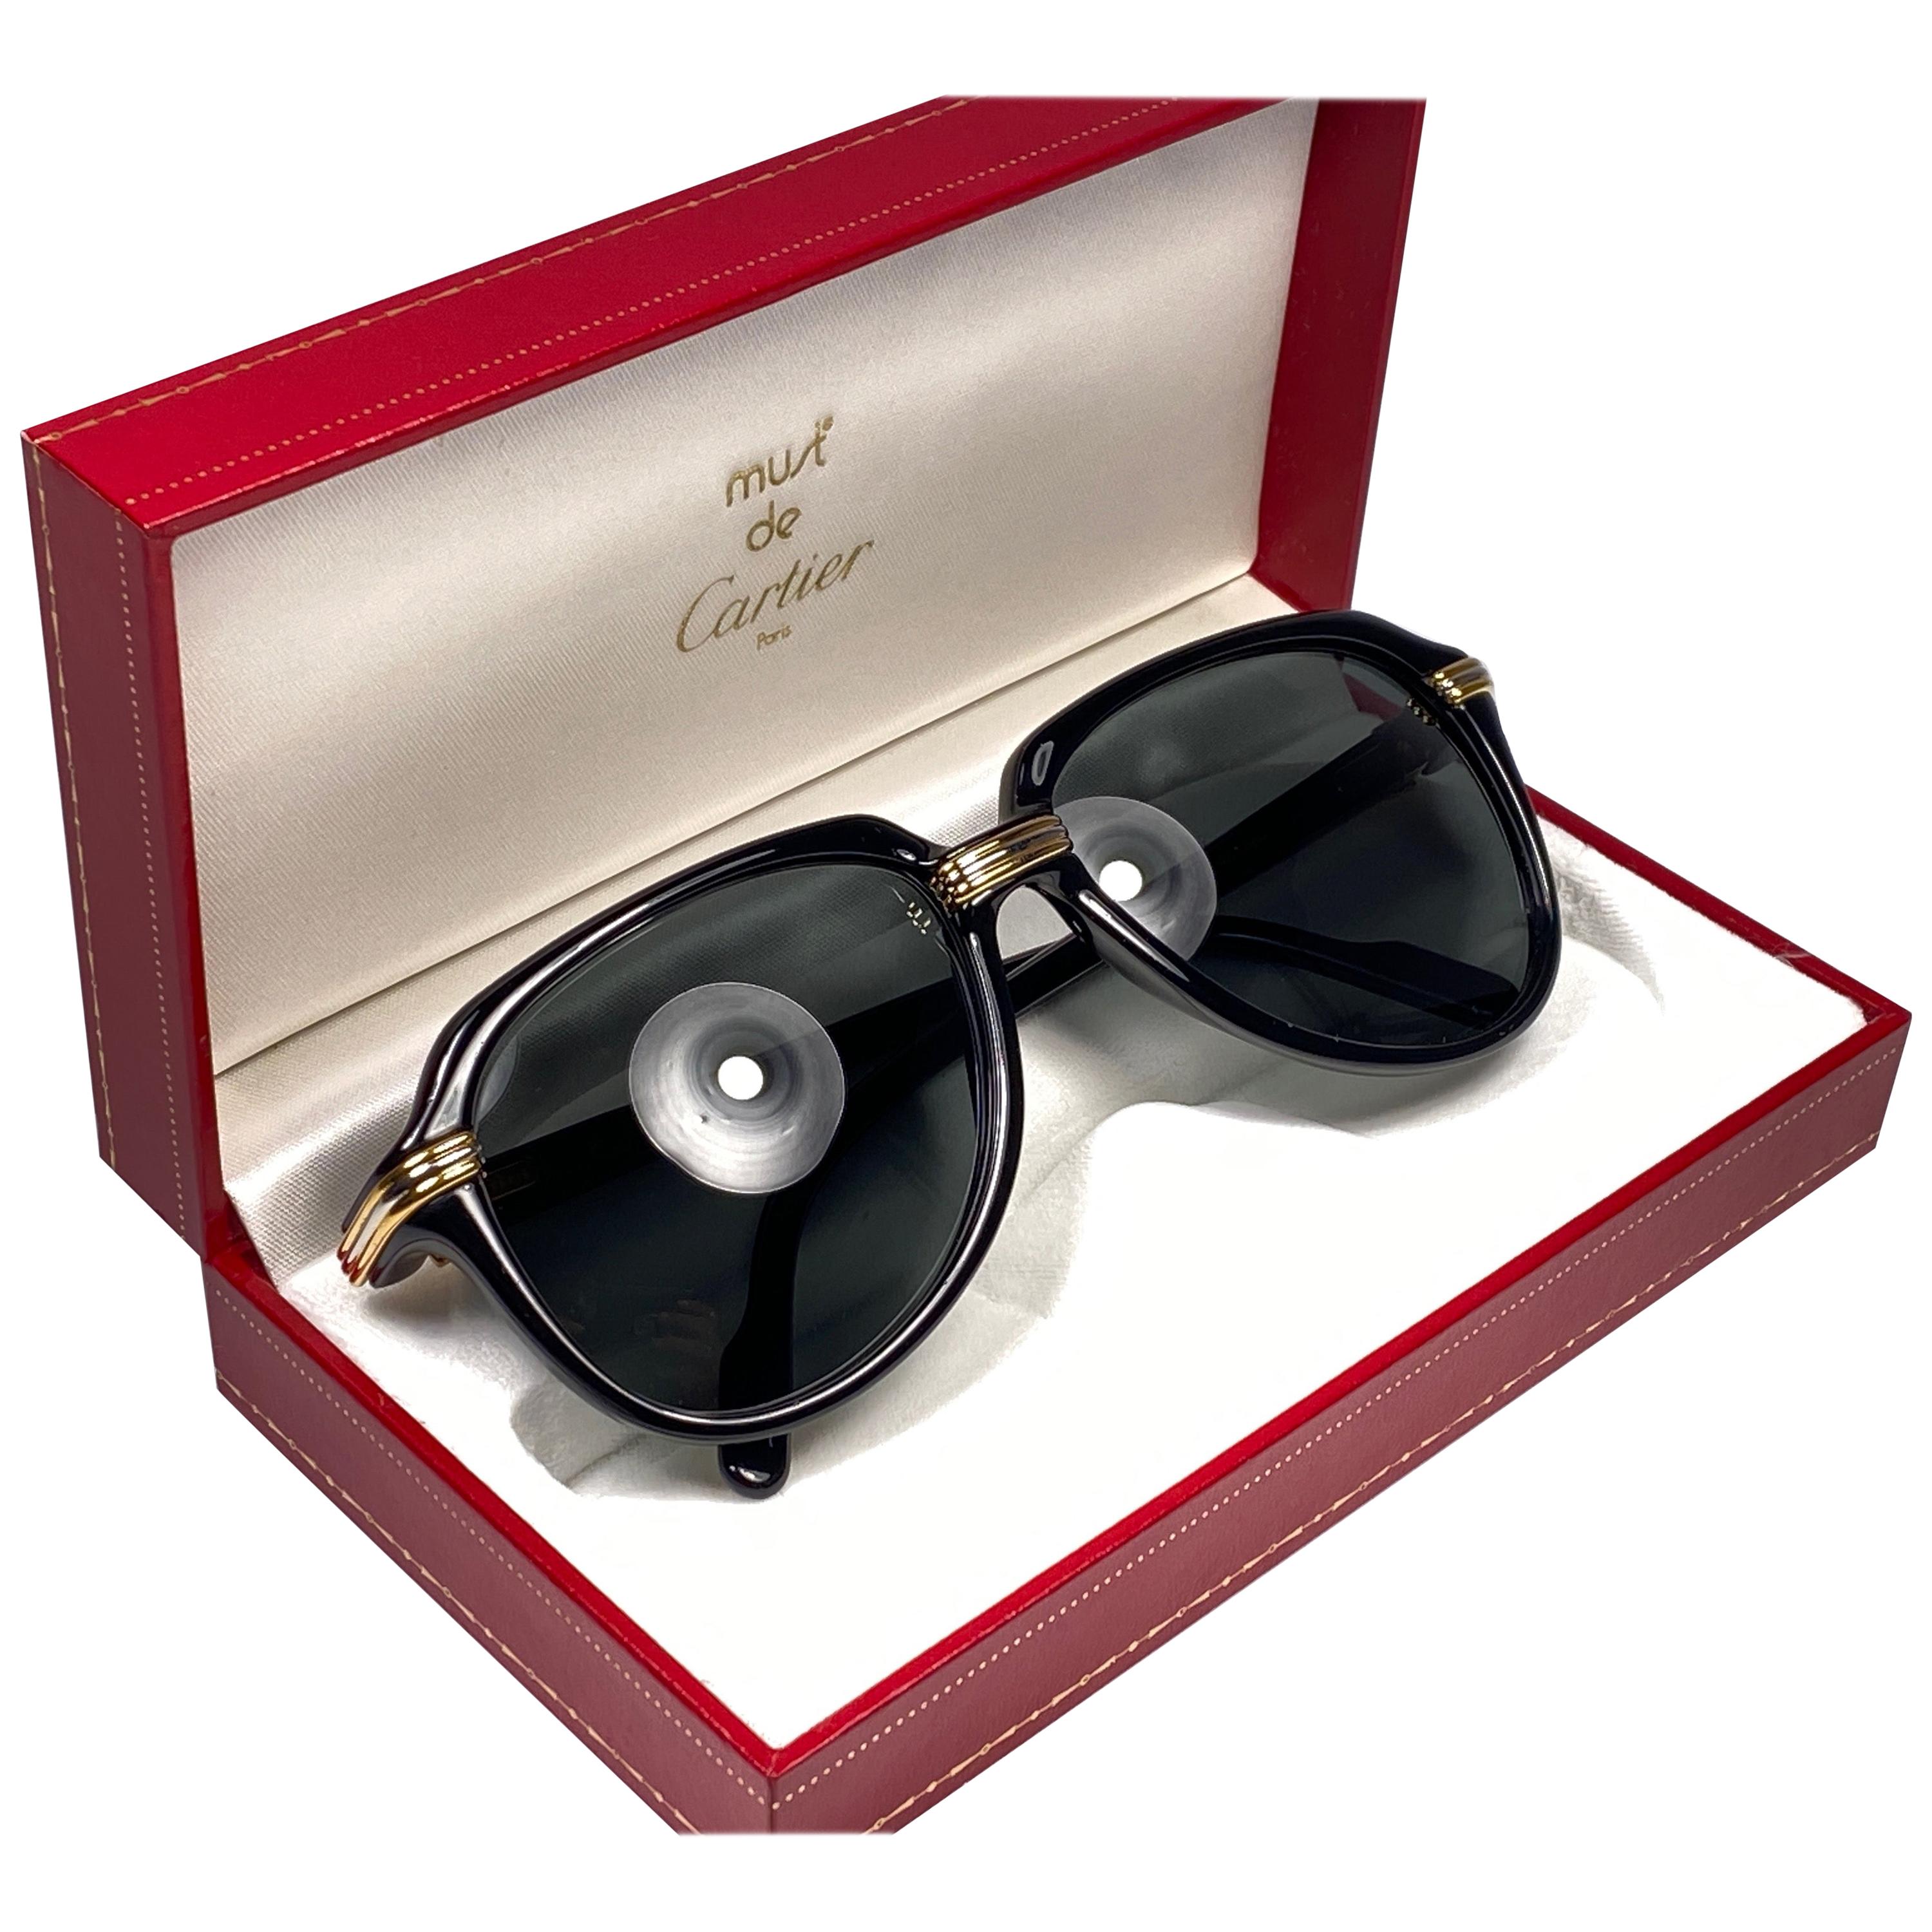 New Collectors Item. Unique and original Cartier Aviator Vitesse sunglasses, the black Edition with yellow and white gold accents. Lenses are spotless medium grey.
Frame is with the sides in gold. All hallmarks. Cartier gold signs on the ear